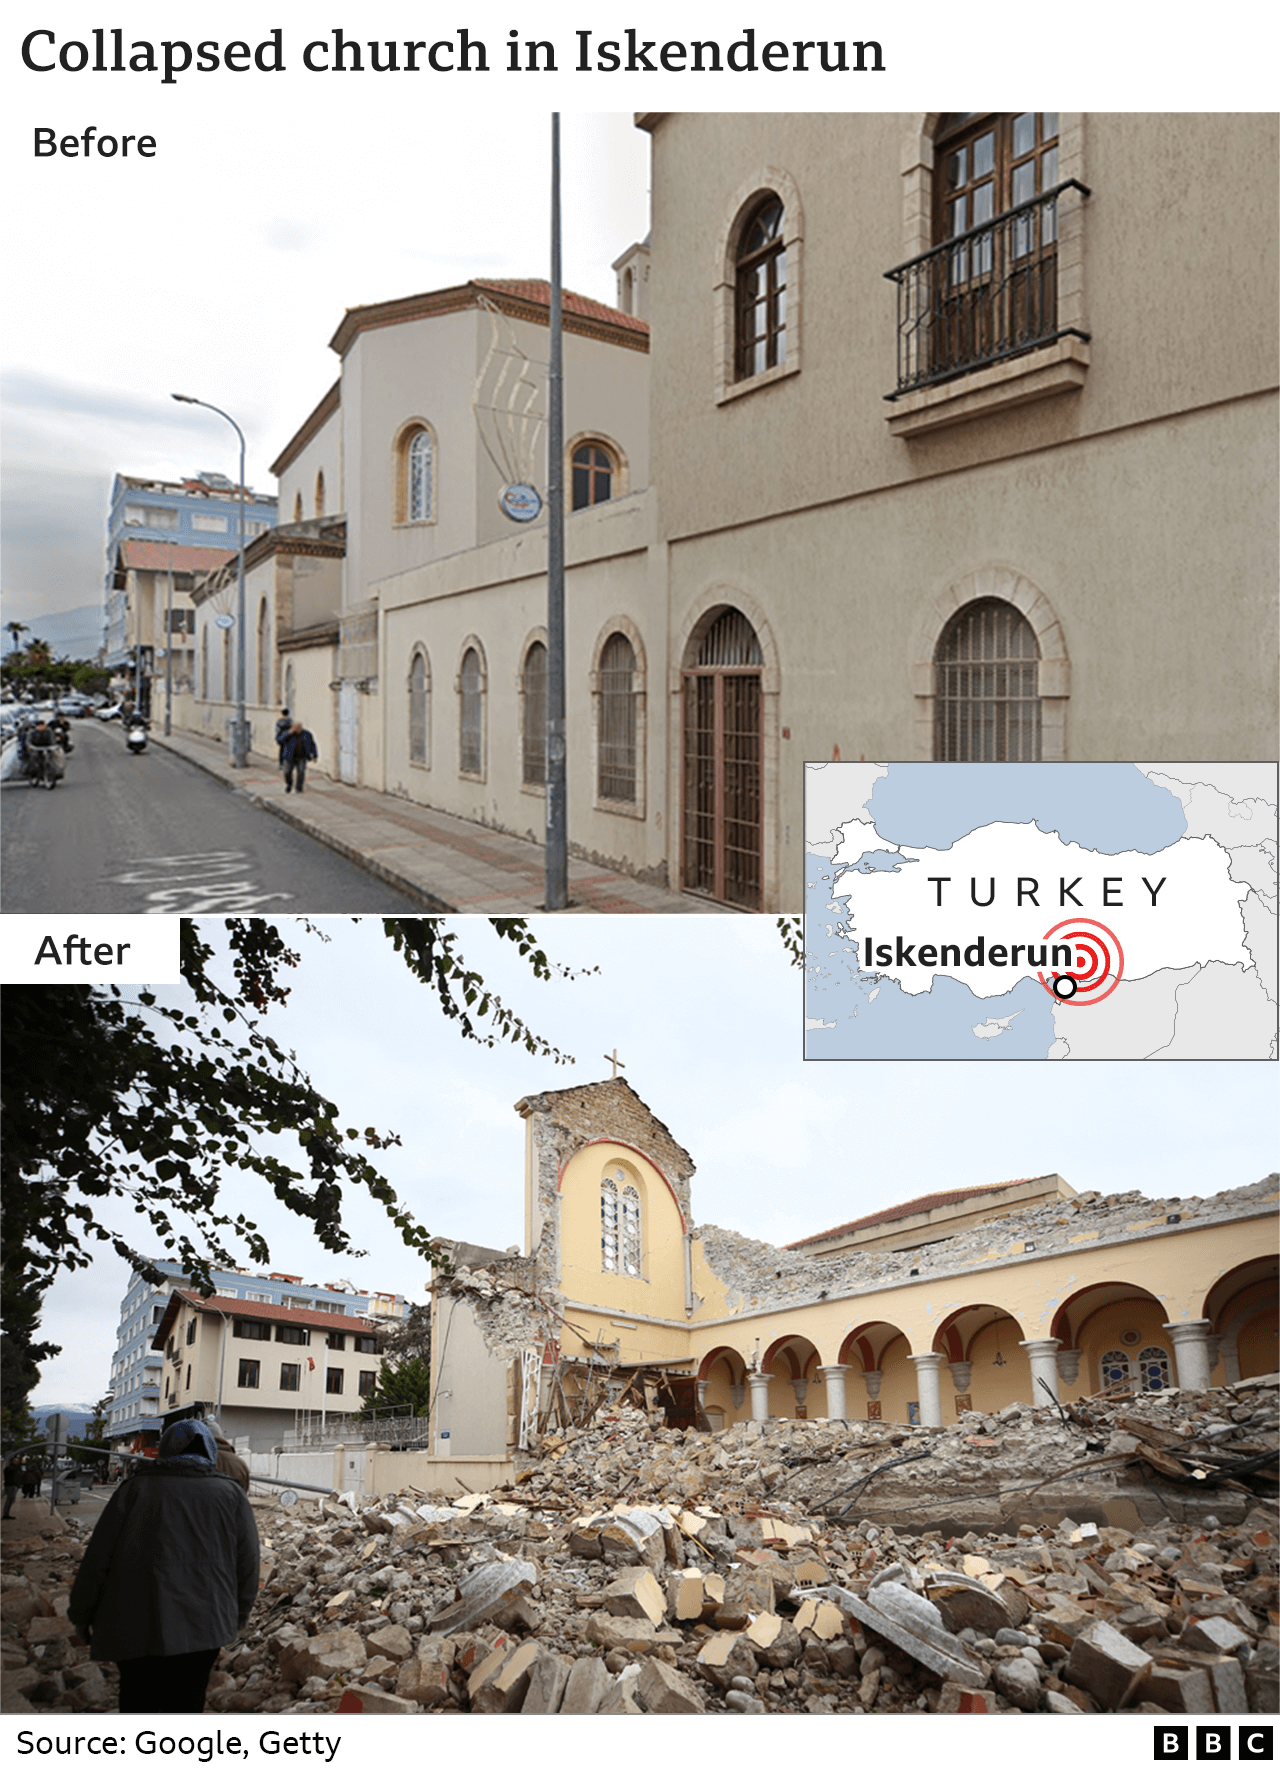 Before and after images showing a collapsed church in Iskenderun, Turkey.